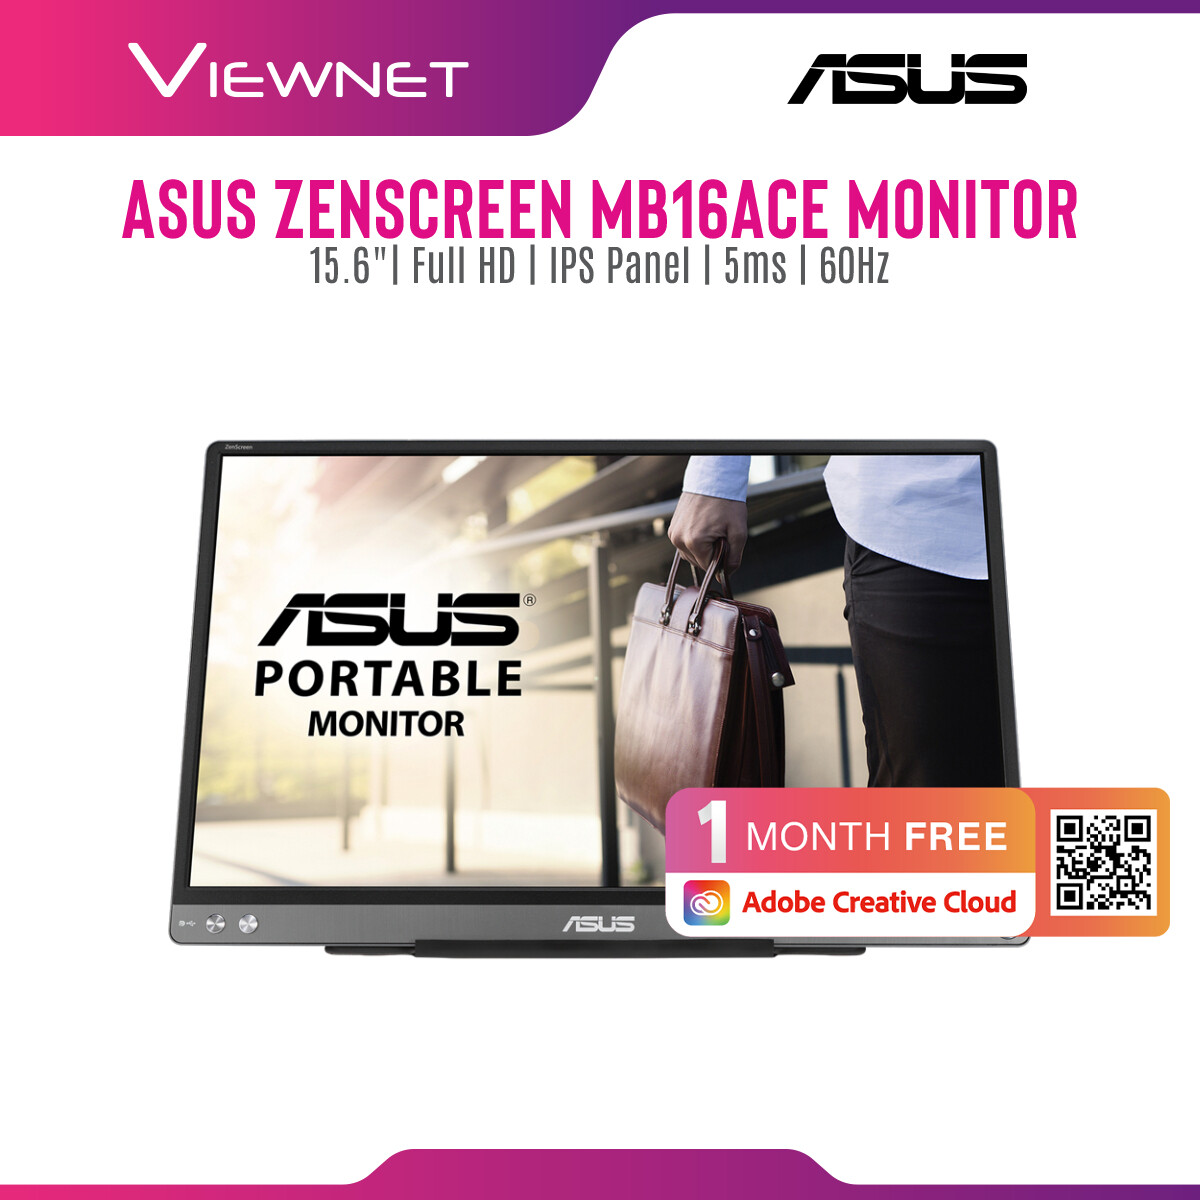 Asus ZenScreen MB16ACE Portable USB Monitor- 15.6 inch Full HD, Hybrid Signal Solution, USB Type-C, Flicker Free, Blue Light Filter, Anti-glare surface